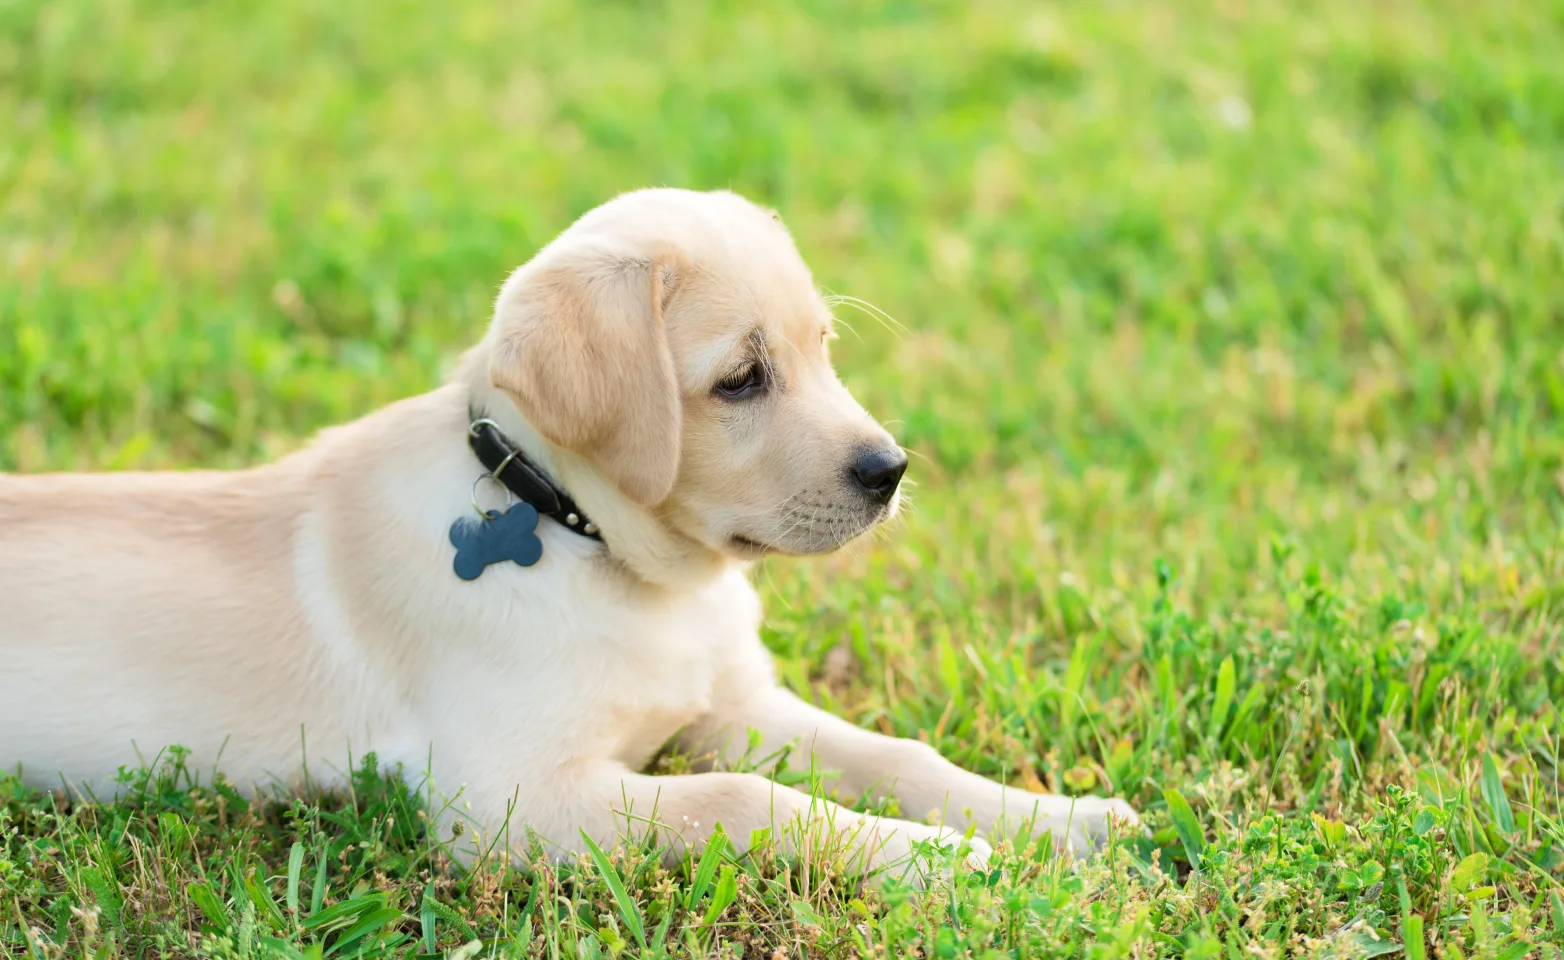 Puppy in grass laying down